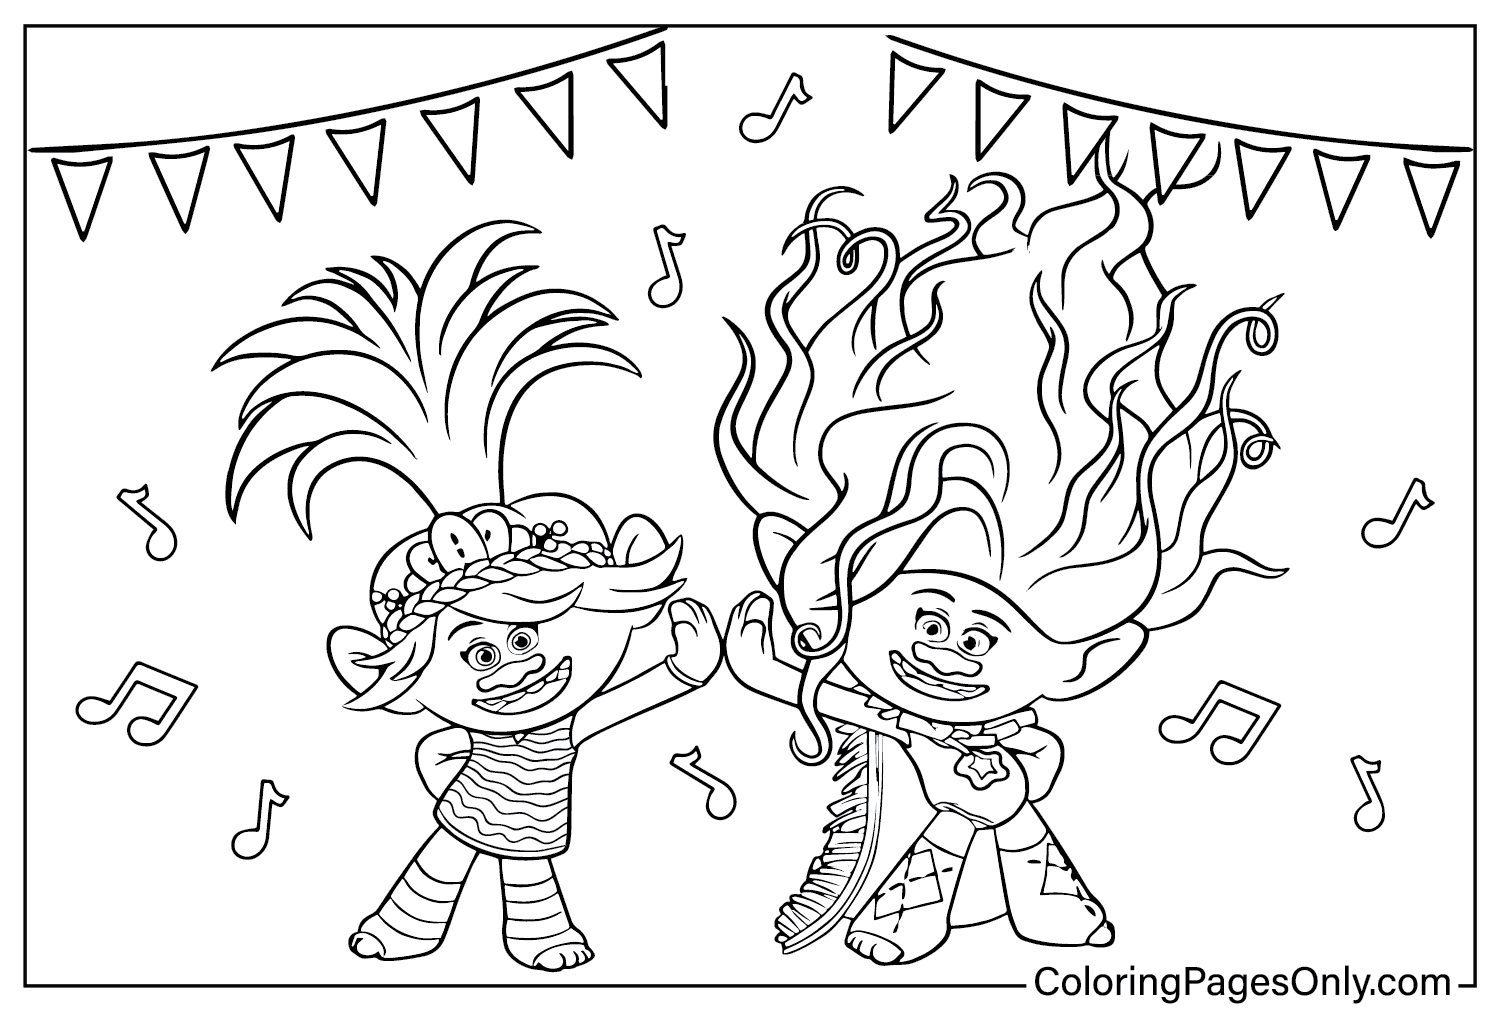 Trolls Band Together Coloring Pages to for Kids from Trolls Band Together